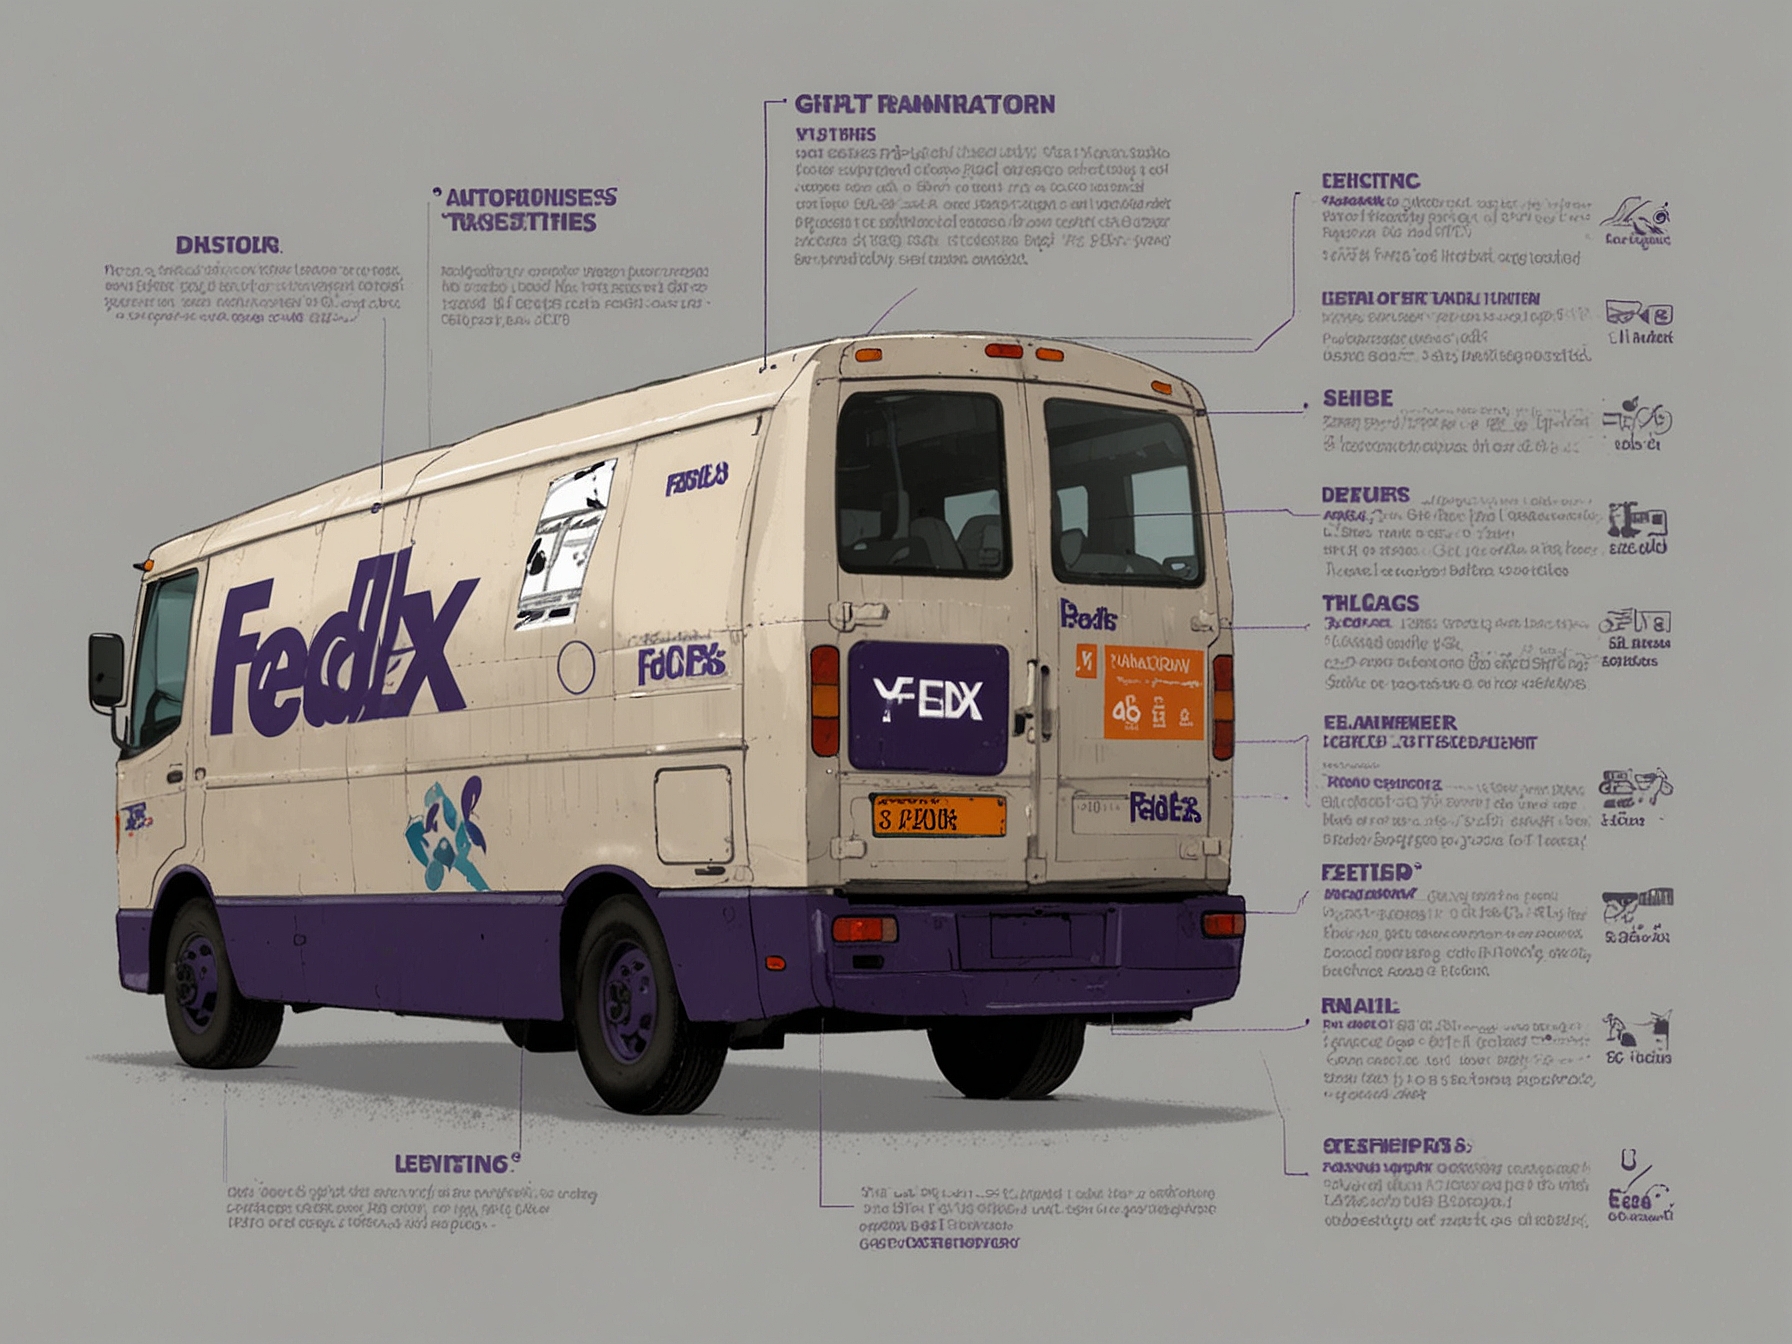 An infographic showing FedEx's digital transformation initiatives, including AI and autonomous delivery solutions, alongside global logistics statistics and sustainability efforts.